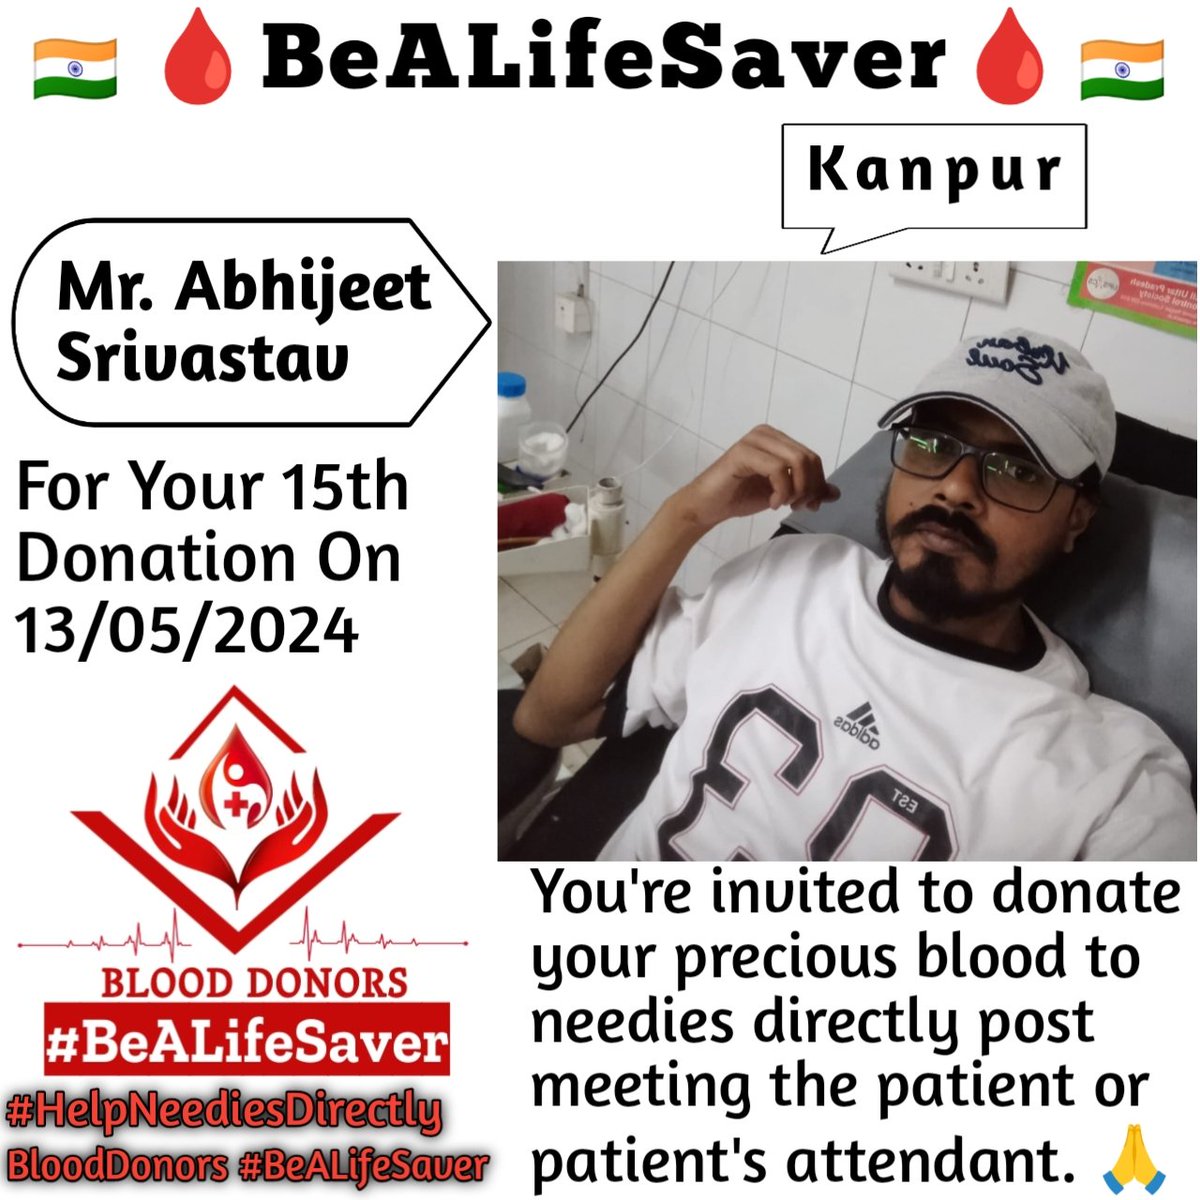 Kanpur BeALifeSaver
Kudos_Mr_Abhijeet_Srivastav_Ji

Today's hero
Mr. Abhijeet_Srivastav Ji donated blood in Kanpur for the 15th Time for one of the needies. Heartfelt Gratitude and Respect to Abhijeet Srivastav Ji for his blood donation for Patient admitted in Kanpur.